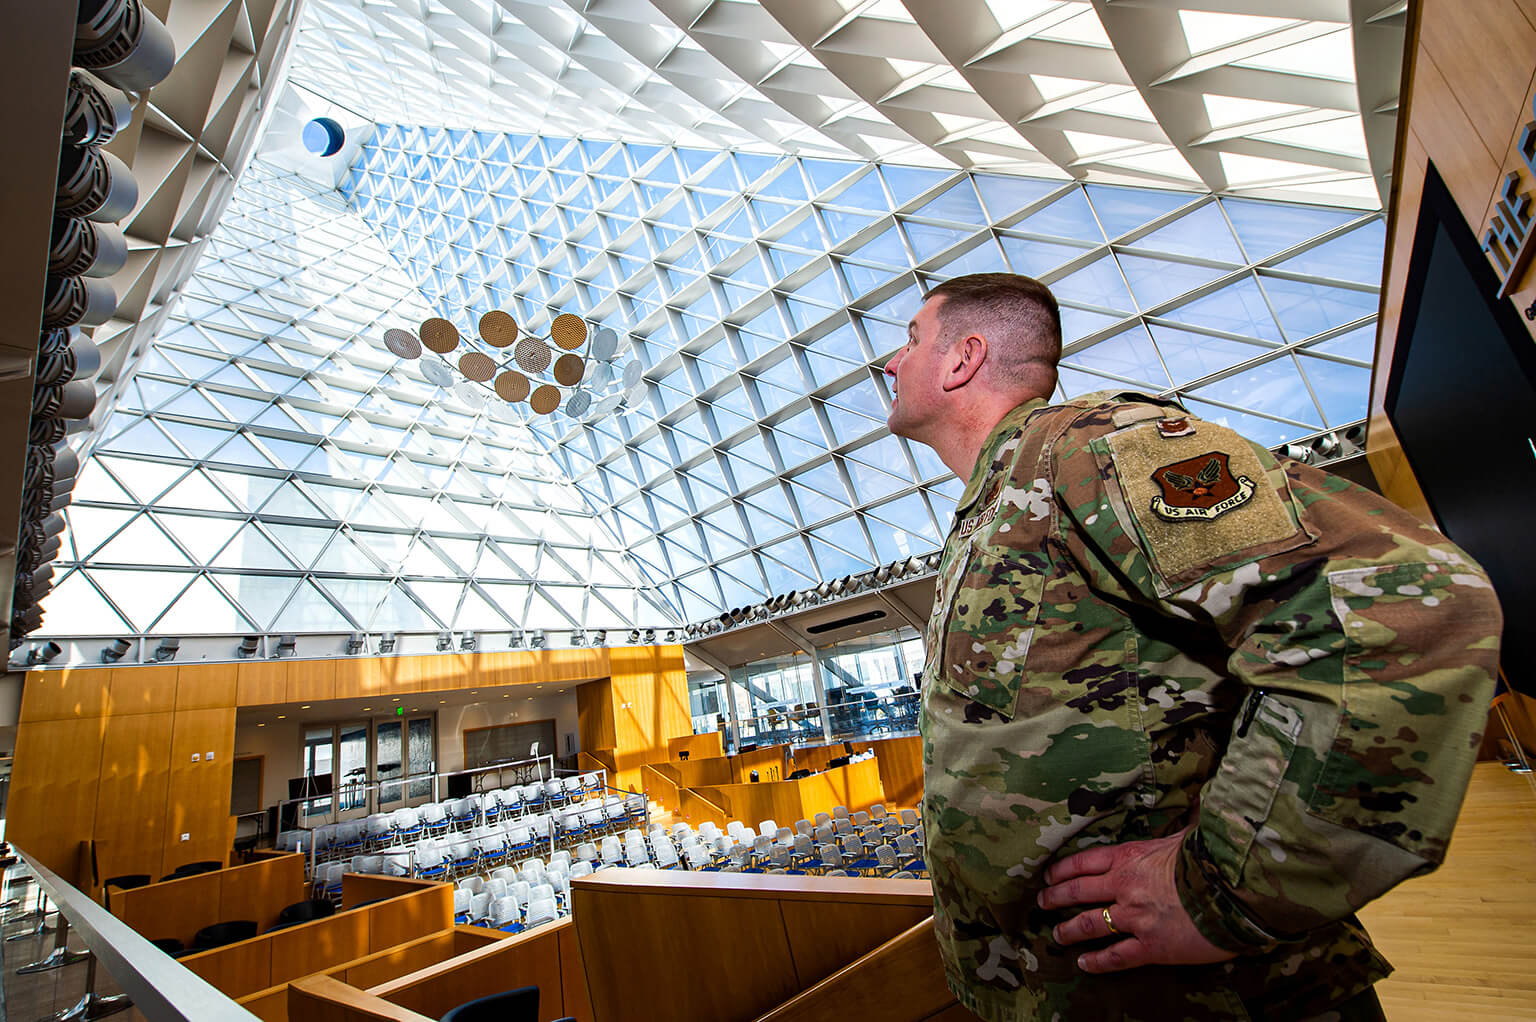 Col. Kurt Wendt, the Center for Character and Leadership Development director at the U.S. Air Force Academy, looks in the direction of the North Star at the U.S. Air Force Academy